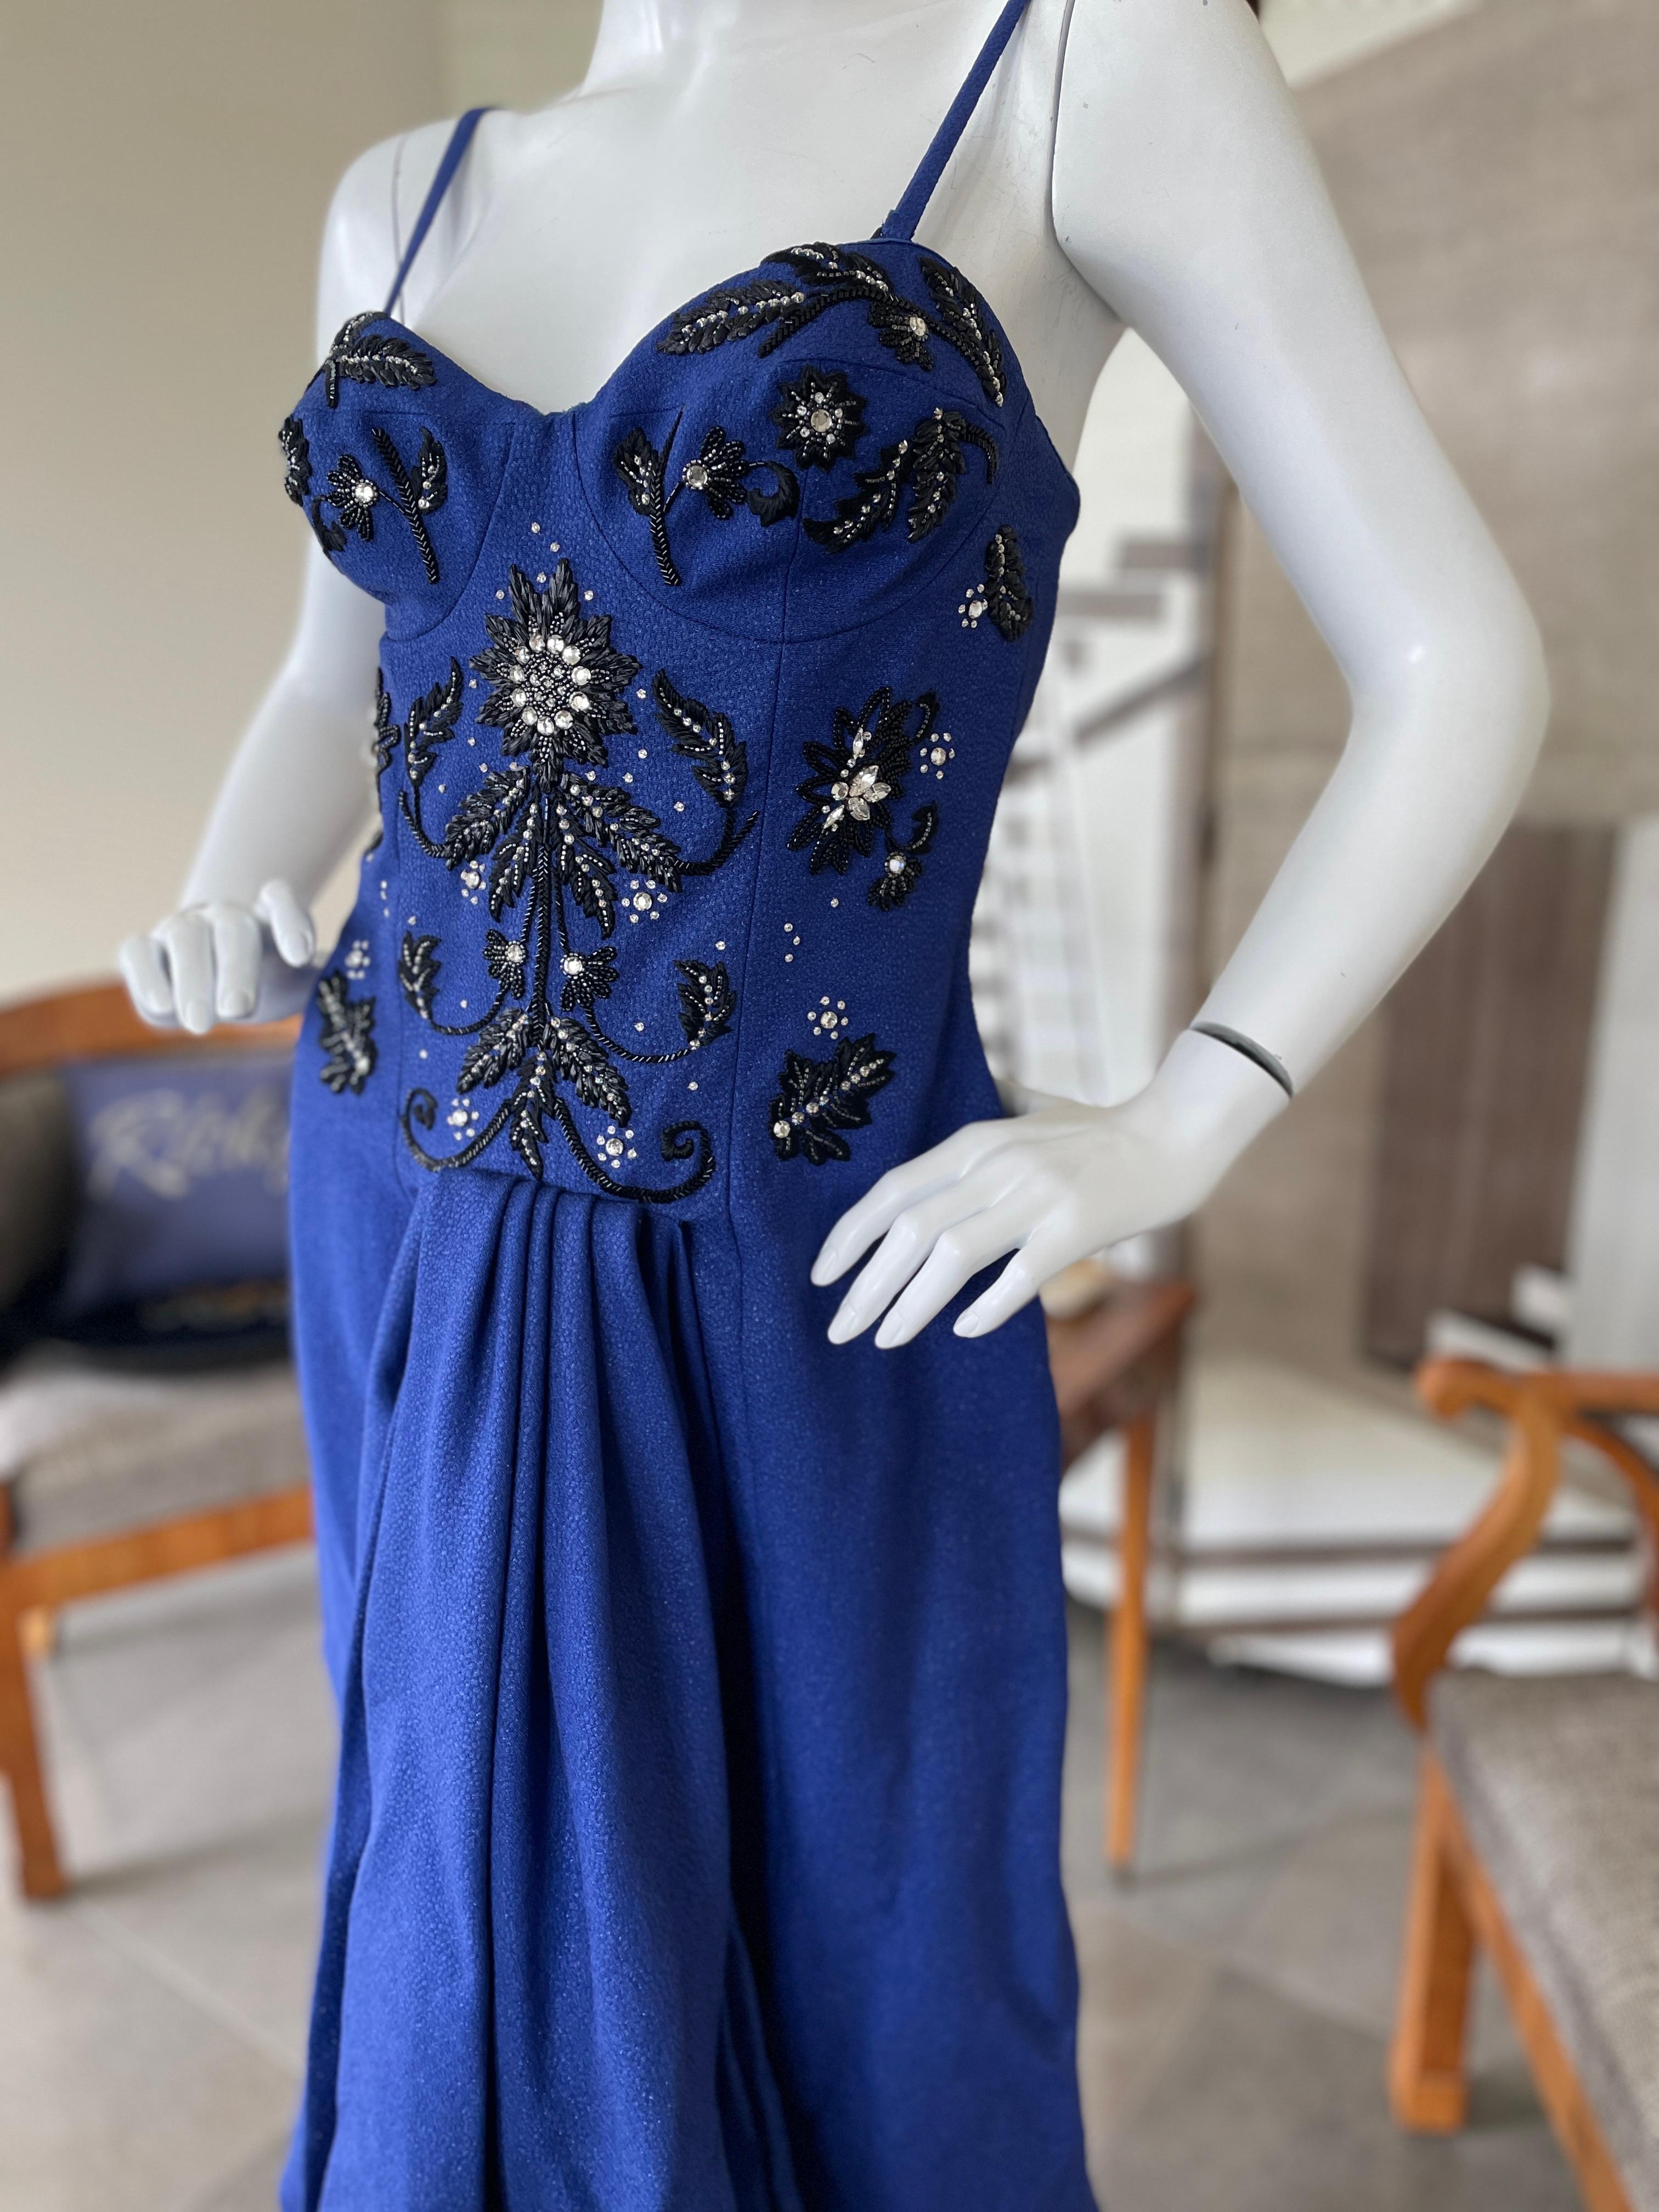 Christian Dior by John Galliano Fall 2007 Blue Dress with Crystal Details For Sale 2